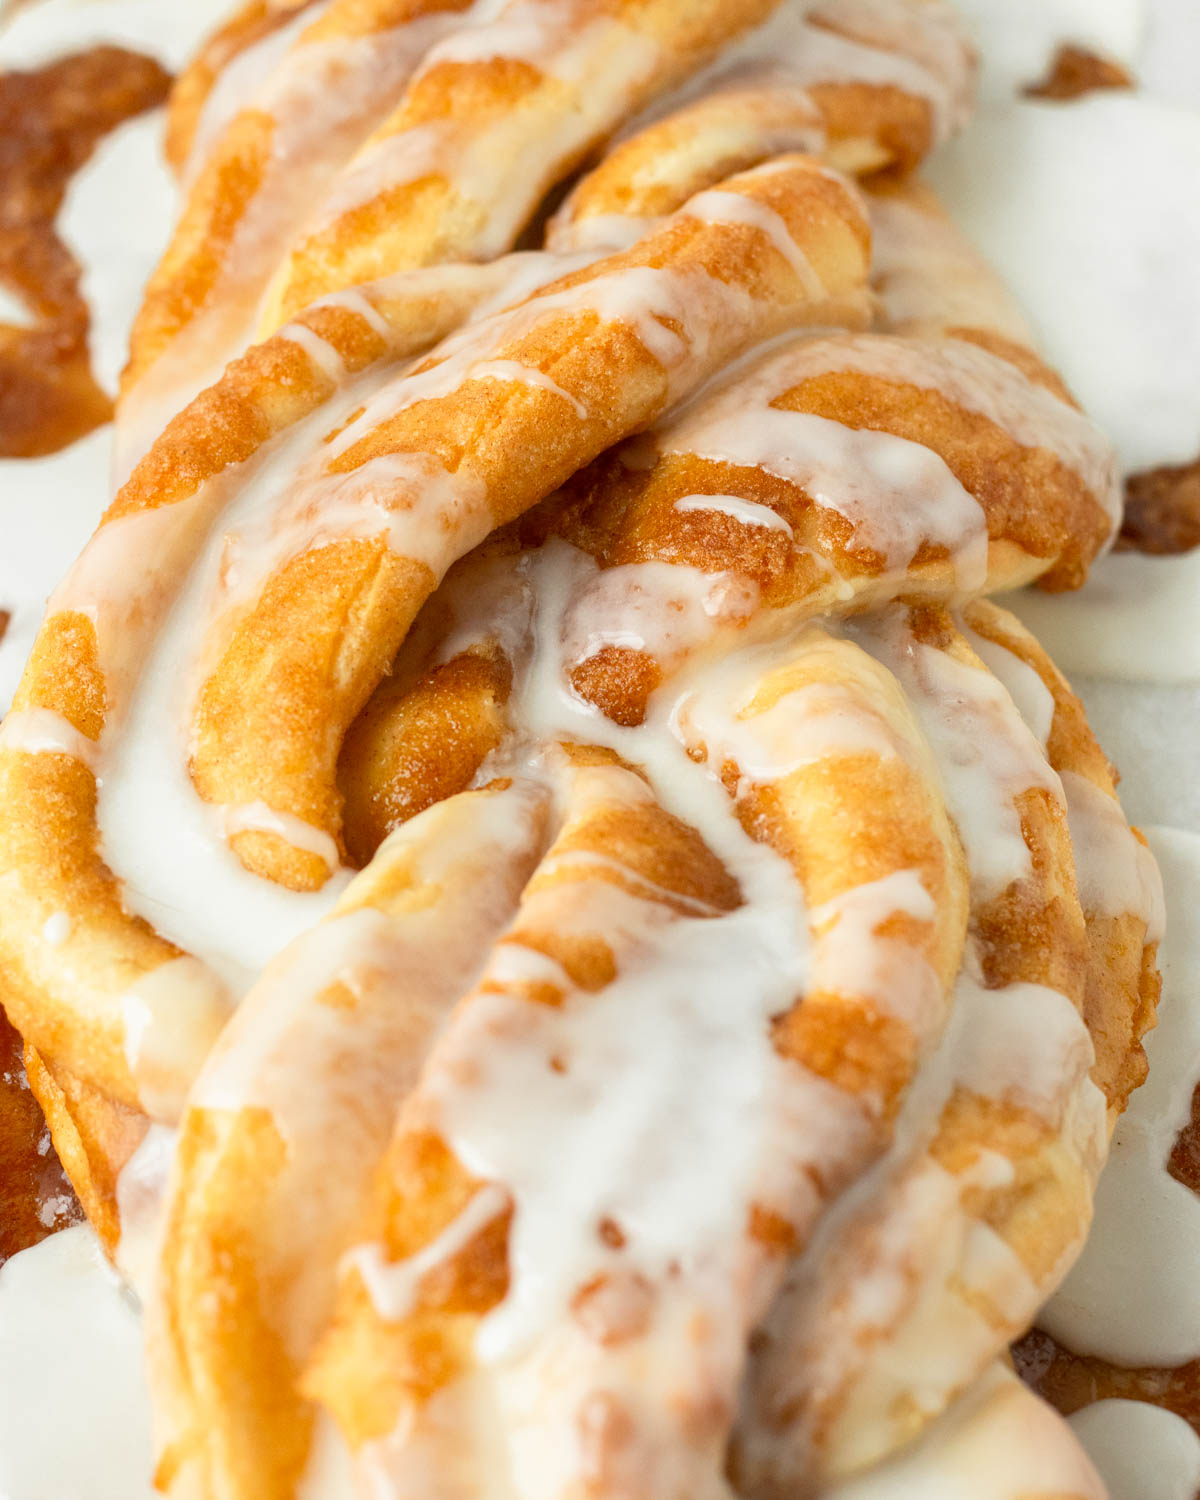 This cinnamon twist loaf is a quick and easy classic brunch recipe made with a quick-rising dough and classic cinnamon sugar filling for a delicious homemade breakfast. We love serving this recipe during the holidays and it is the perfect Christmas breakfast recipe.